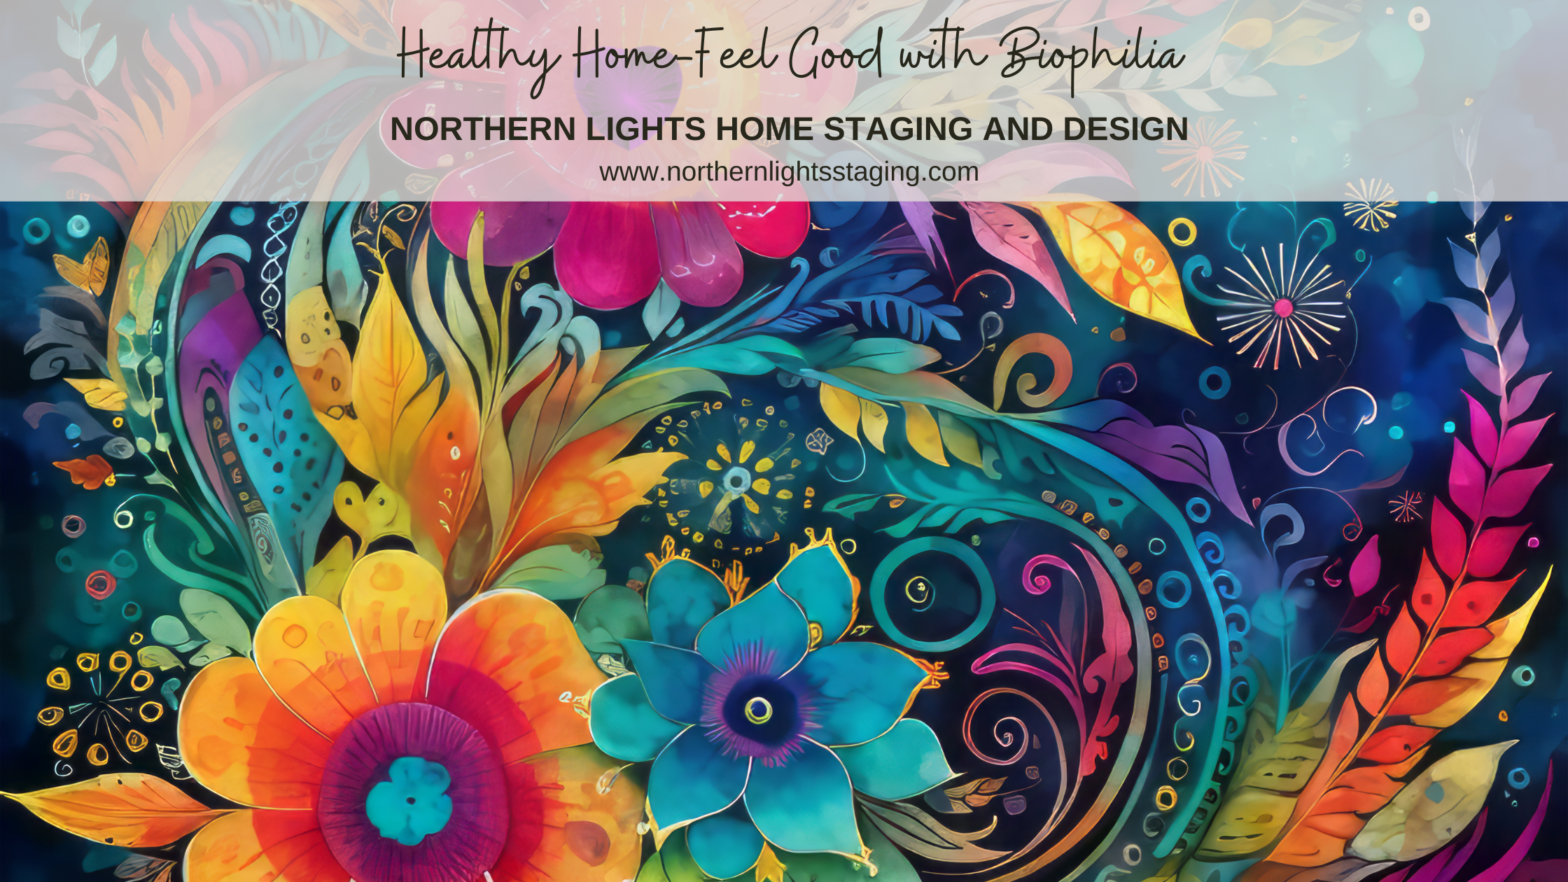 Healthy Home- Feel Good with Biophilia by Northern Lights Home Staging and Design